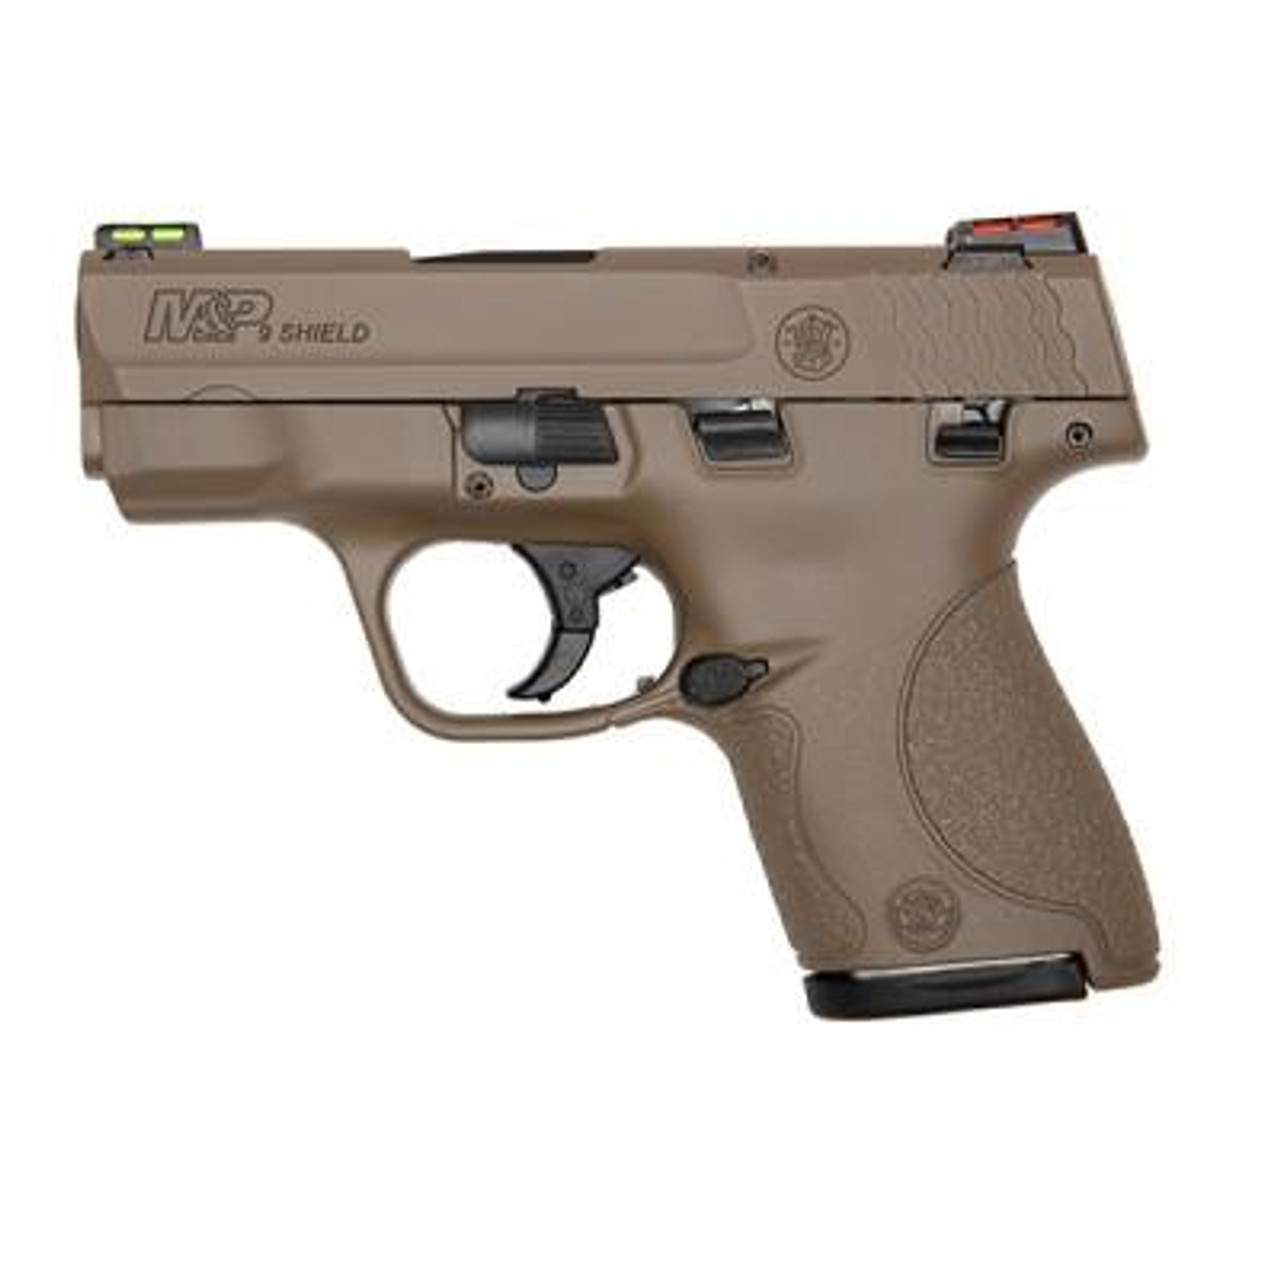 looking for a m&p shield 9mm brass catcher